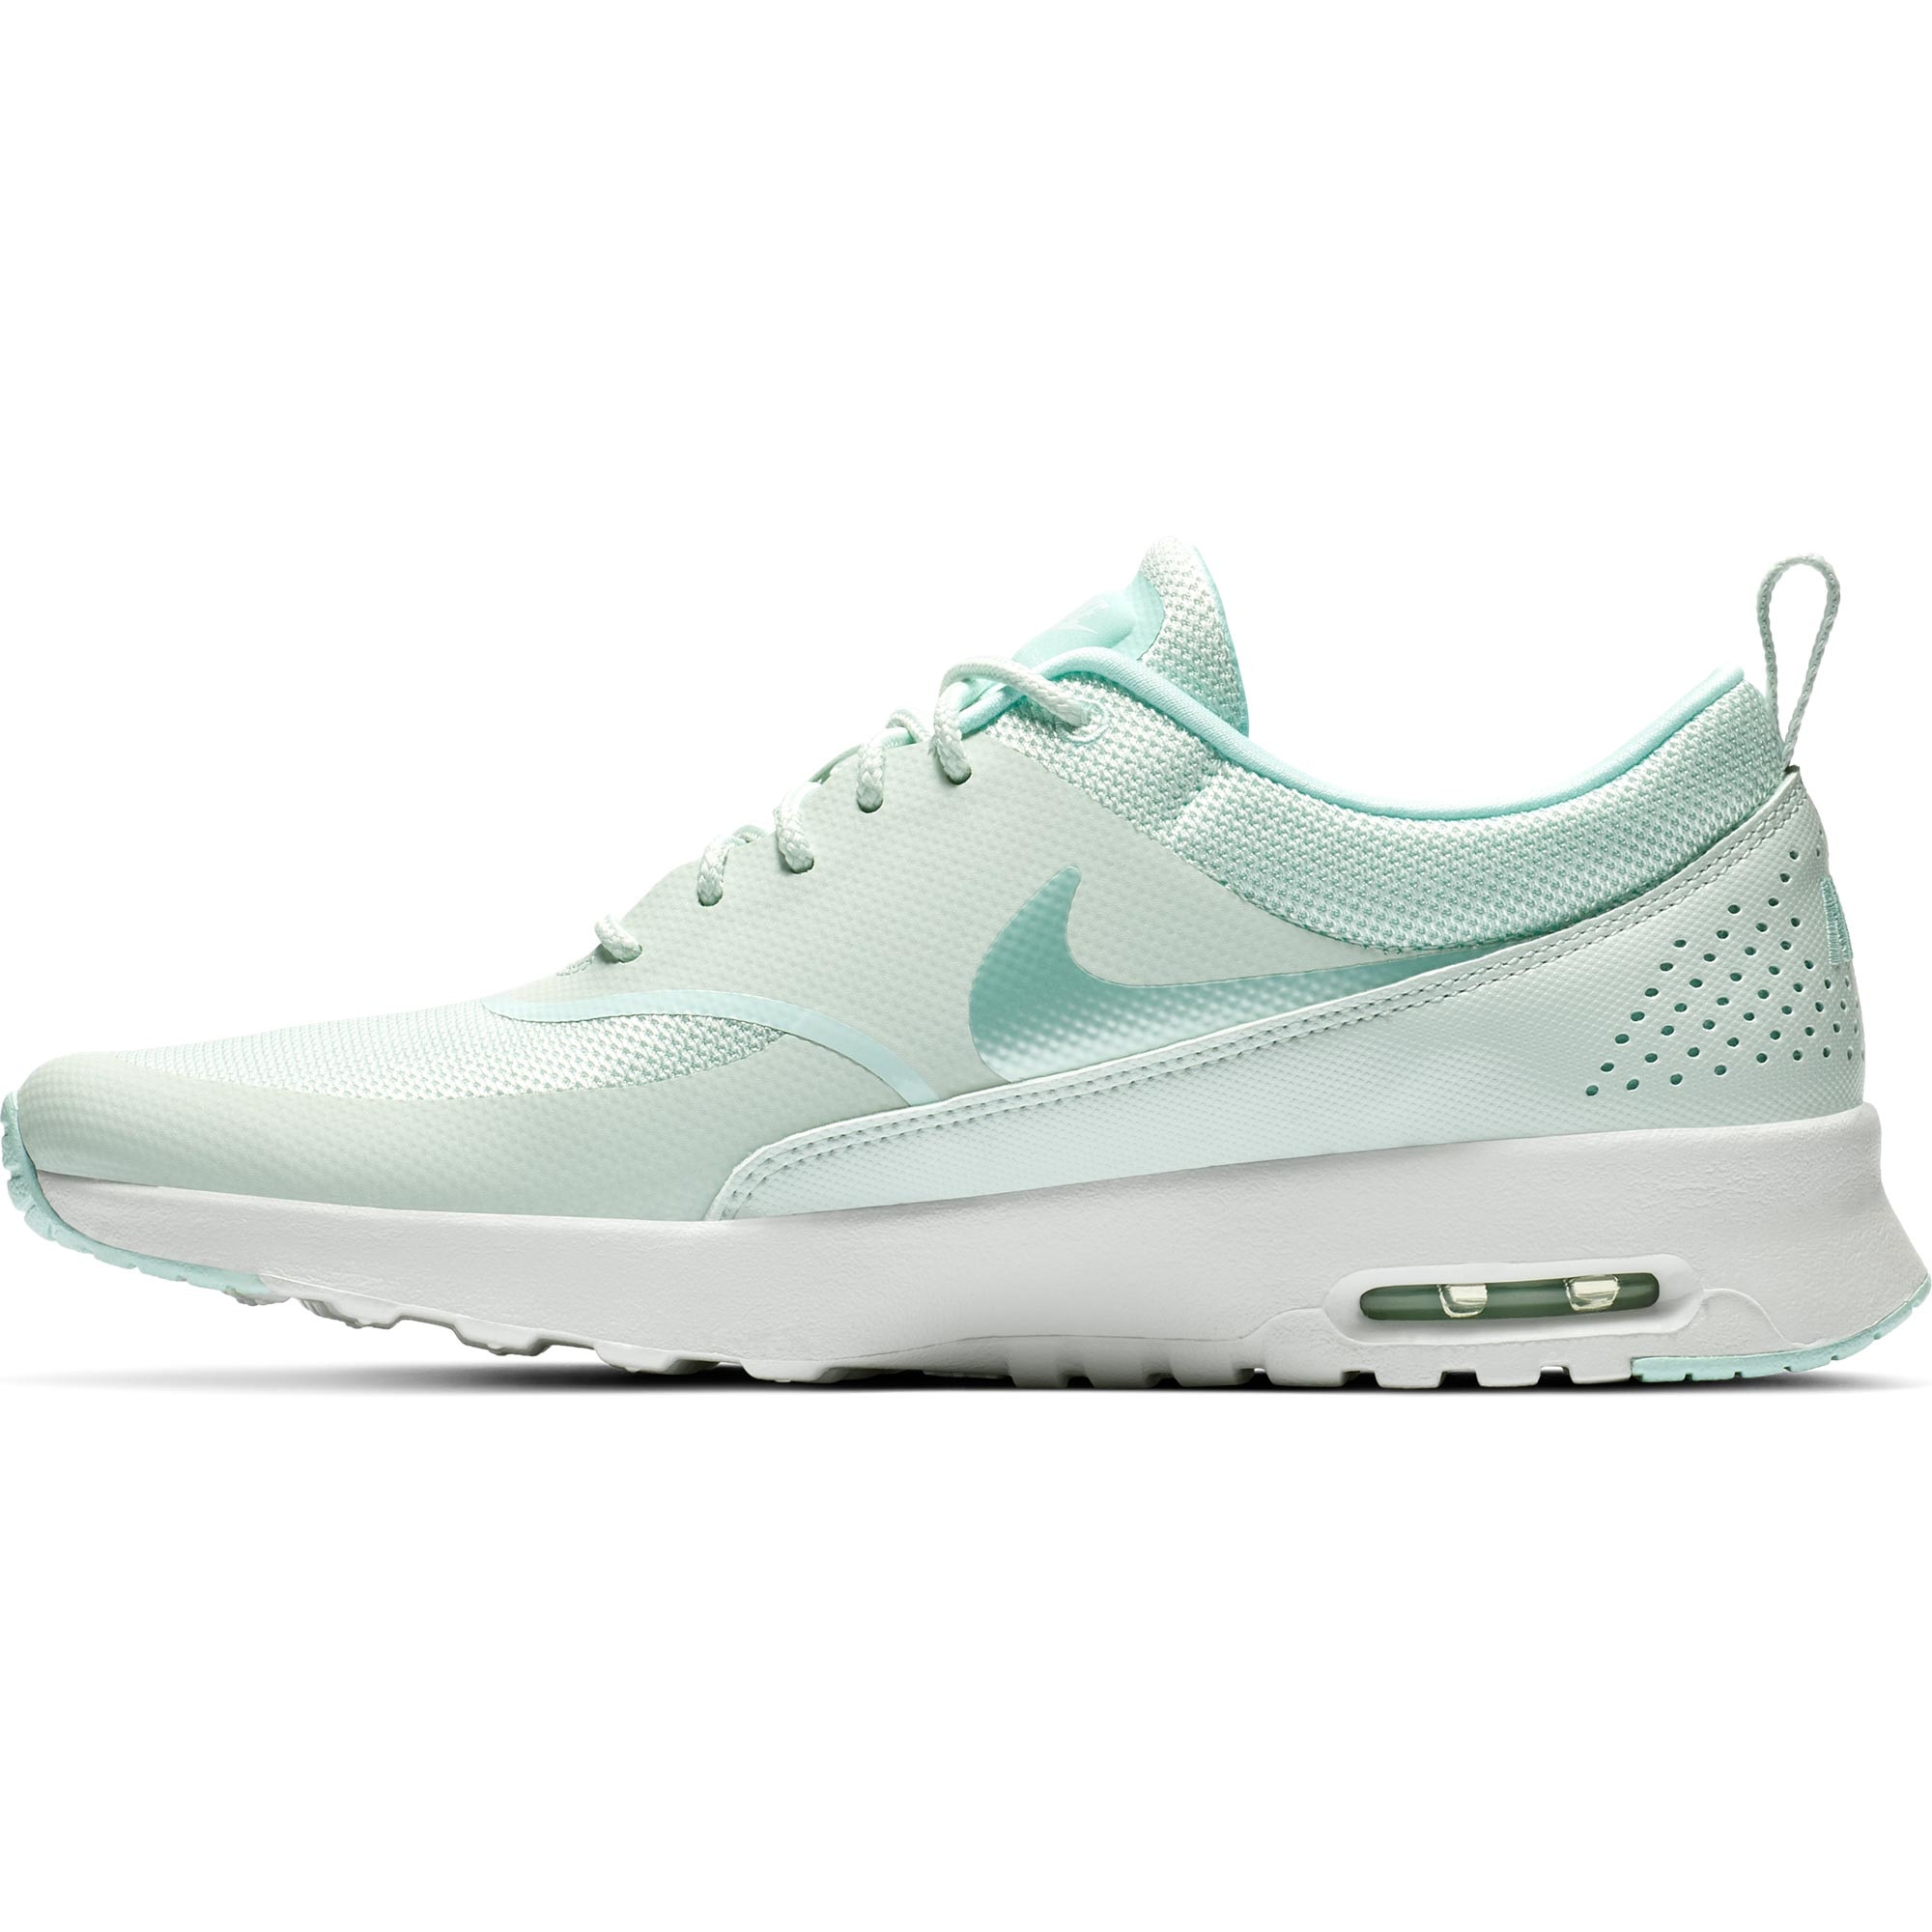 M NIKE AIR MAX 90 ULTRA MOIRE - Nike » Collective®